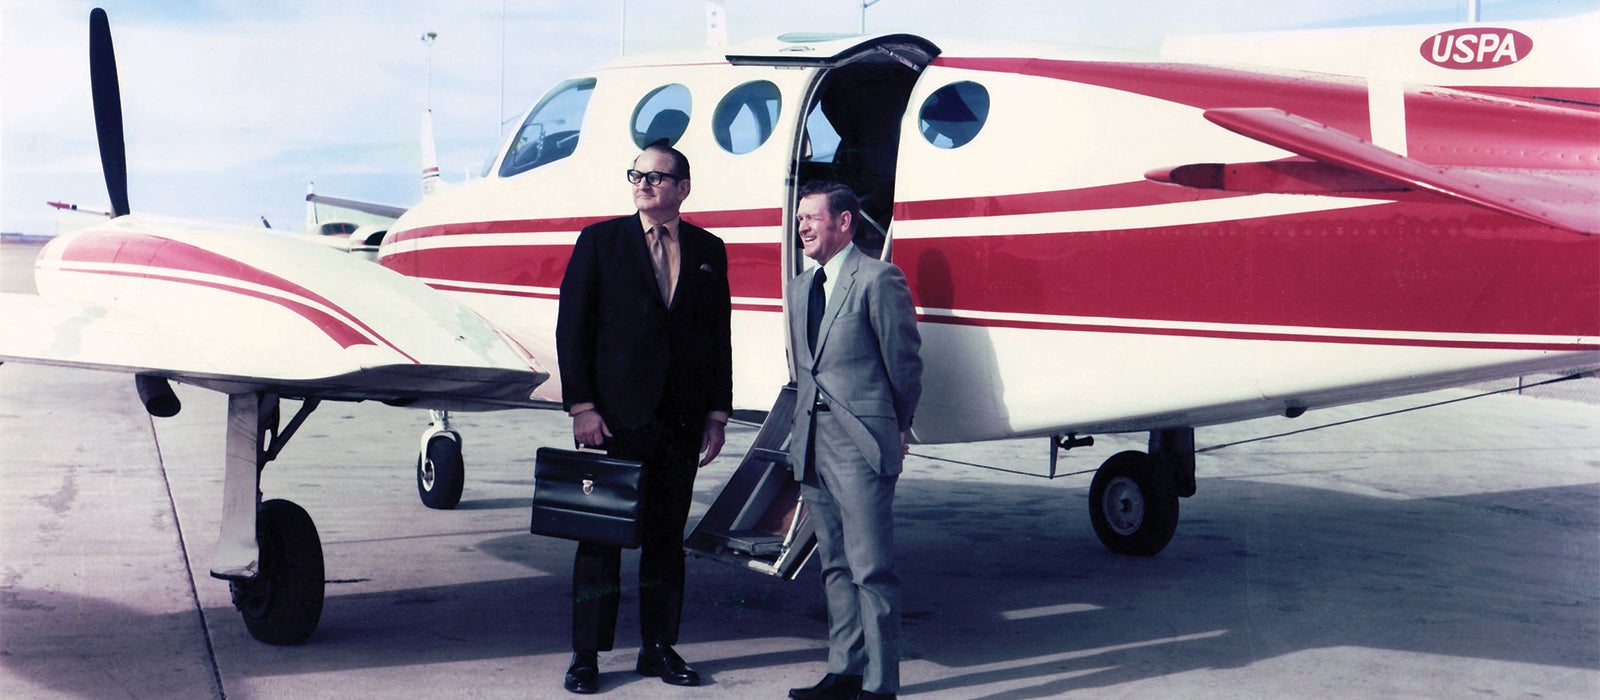 Two men standing in front of a small plane on a runway